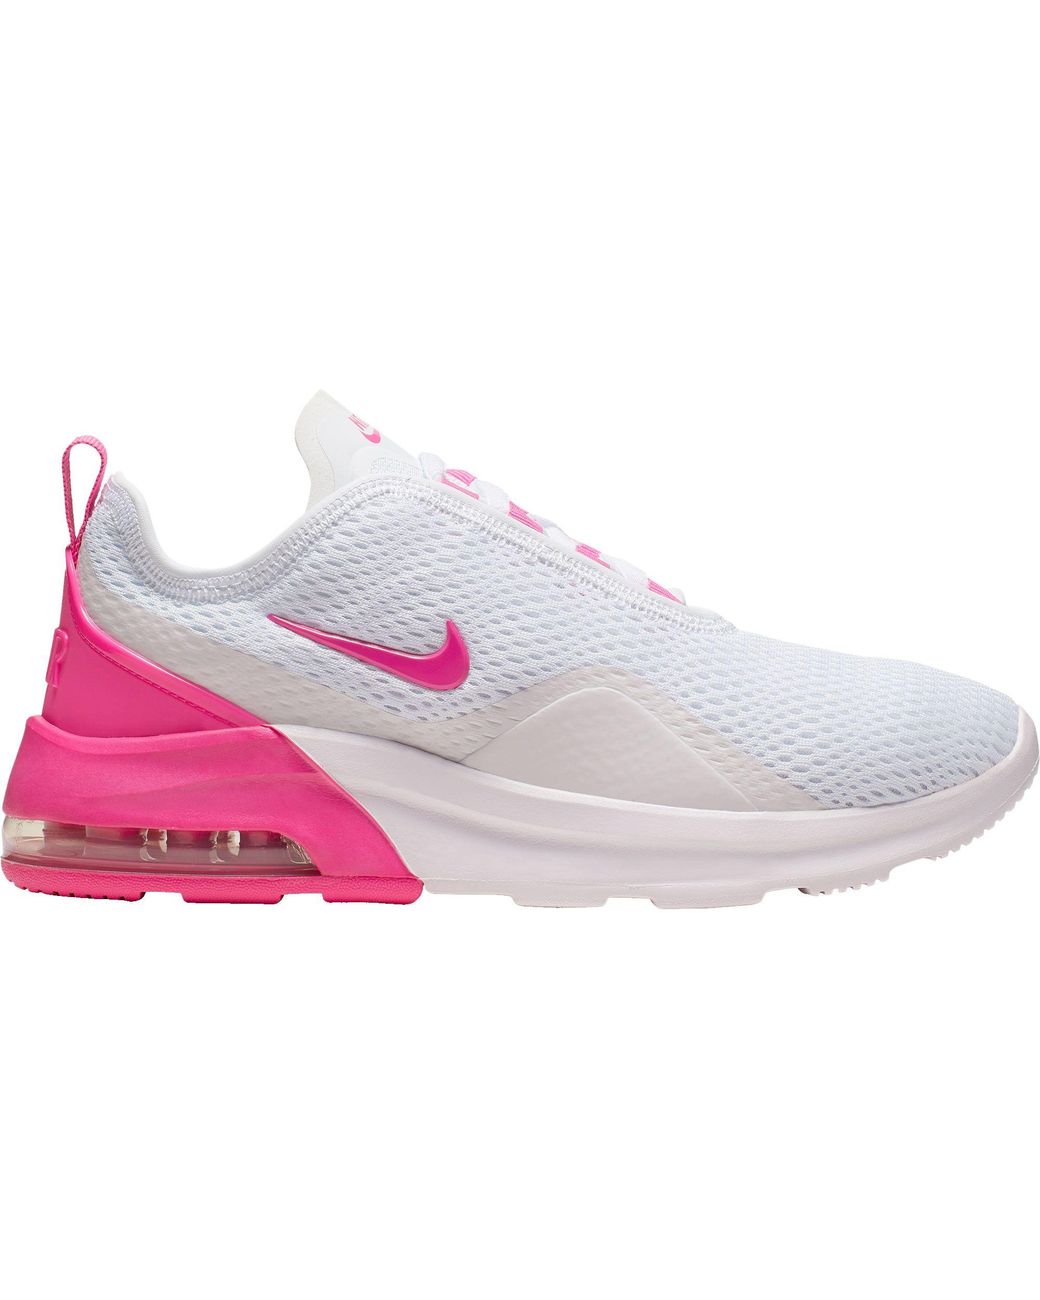 Nike Rubber Air Max Motion 2 Shoes in White/Pink (Pink) | Lyst